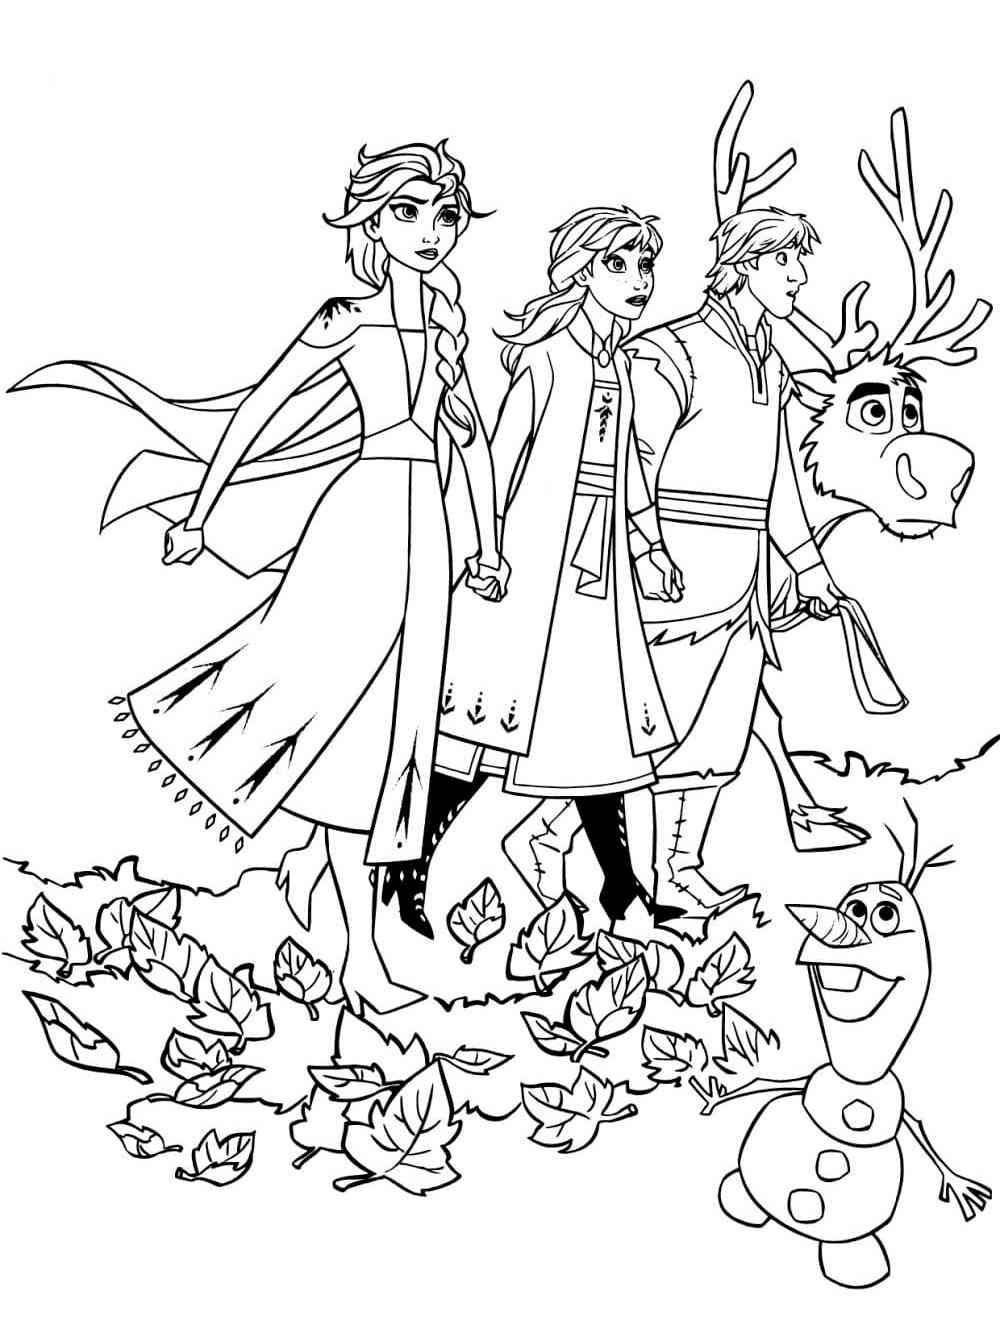 Frozen 34 coloring page